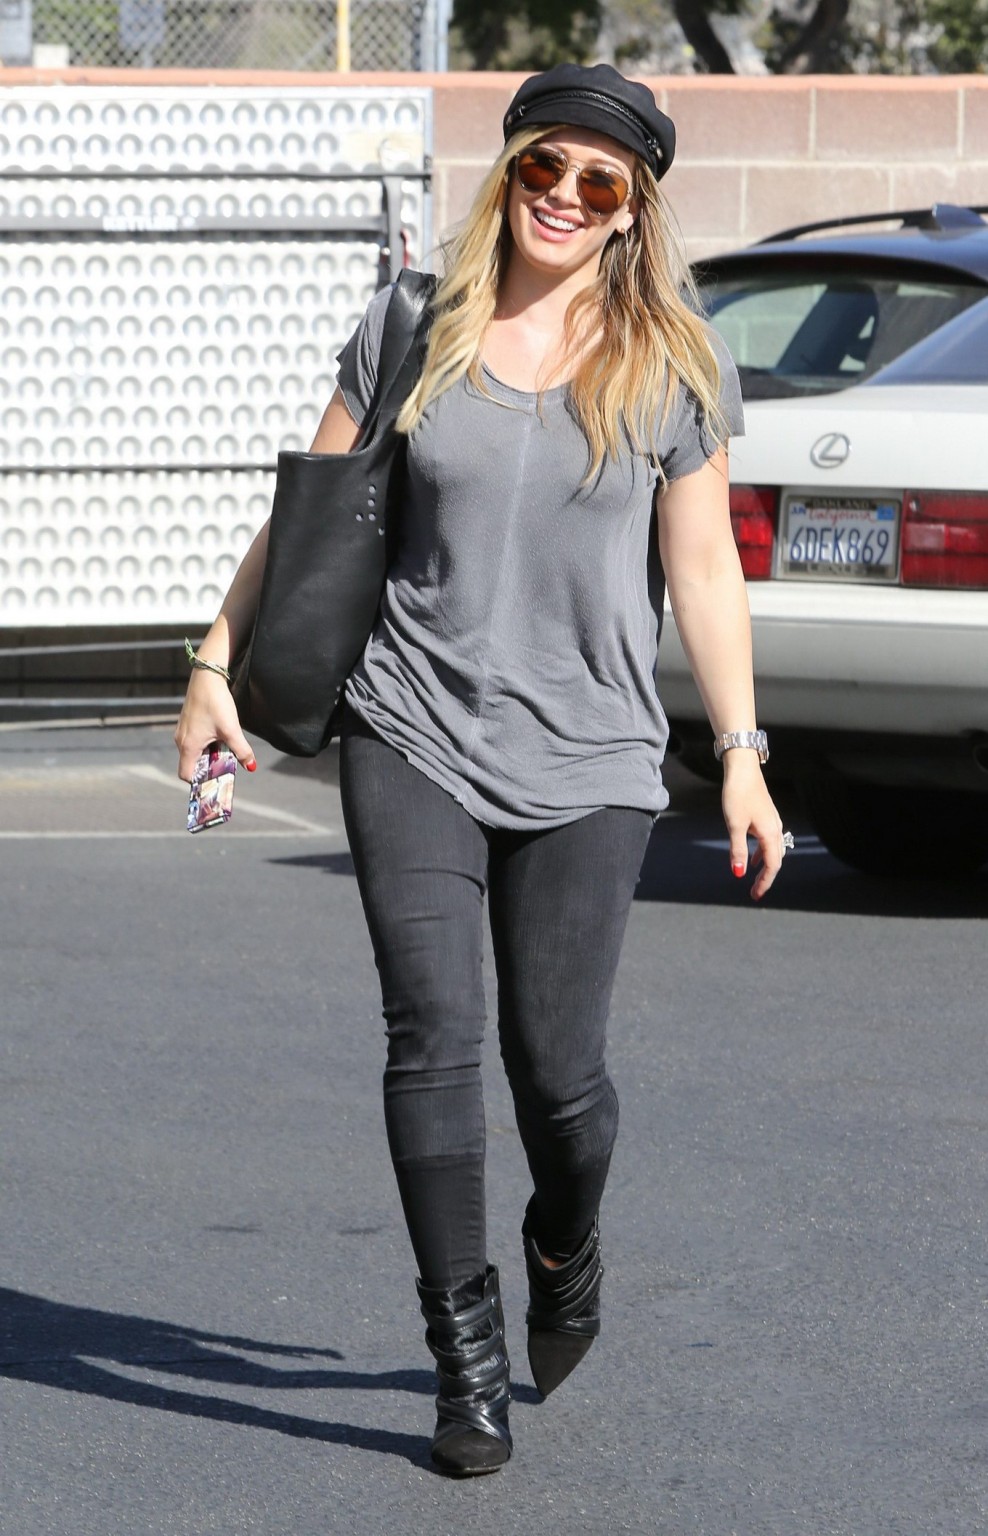 Hilary Duff showing hard pokies in a gray top and tight jeans out in Santa Monic #75213823